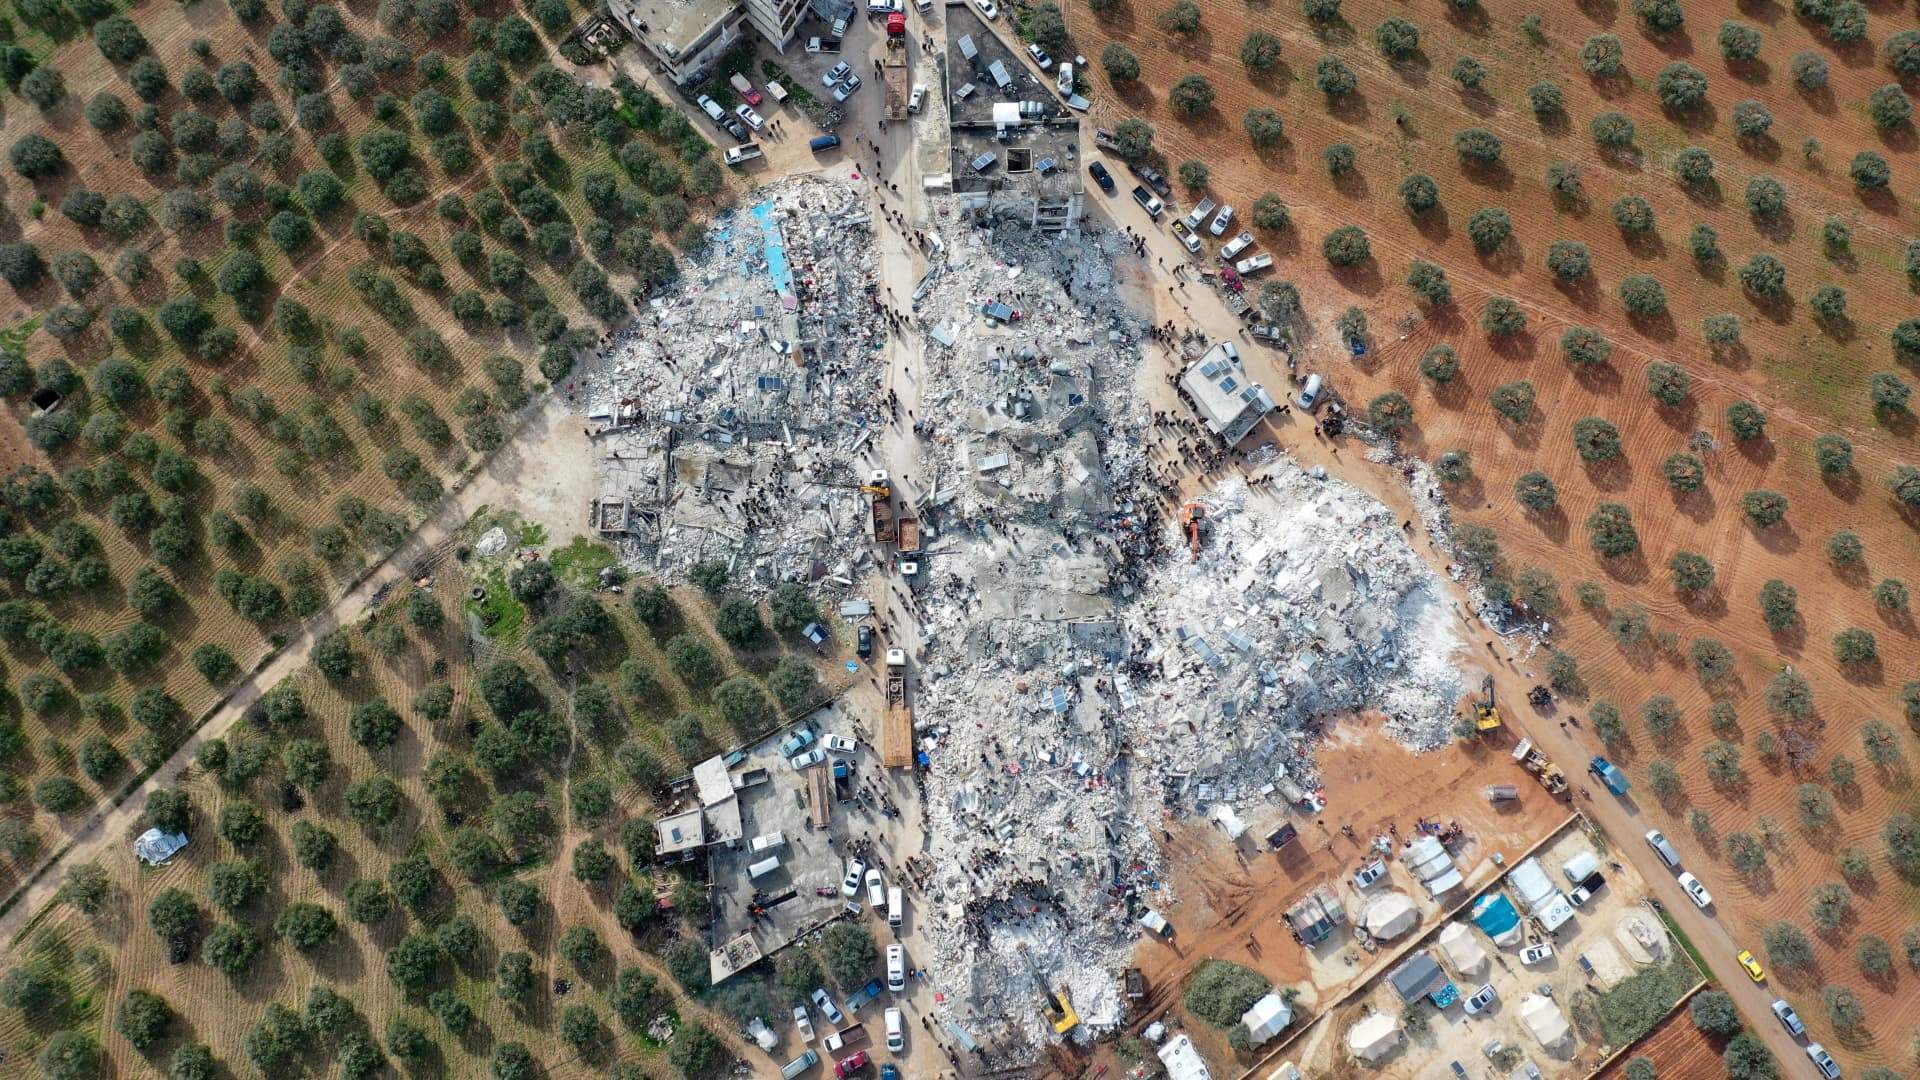 This aerial view shows residents searching for victims and survivors amidst the rubble of collapsed buildings following an earthquake in the village of Besnia near the twon of Harim, in Syria's rebel-held noryhwestern Idlib province on the border with Turkey, on February 6, 2022.